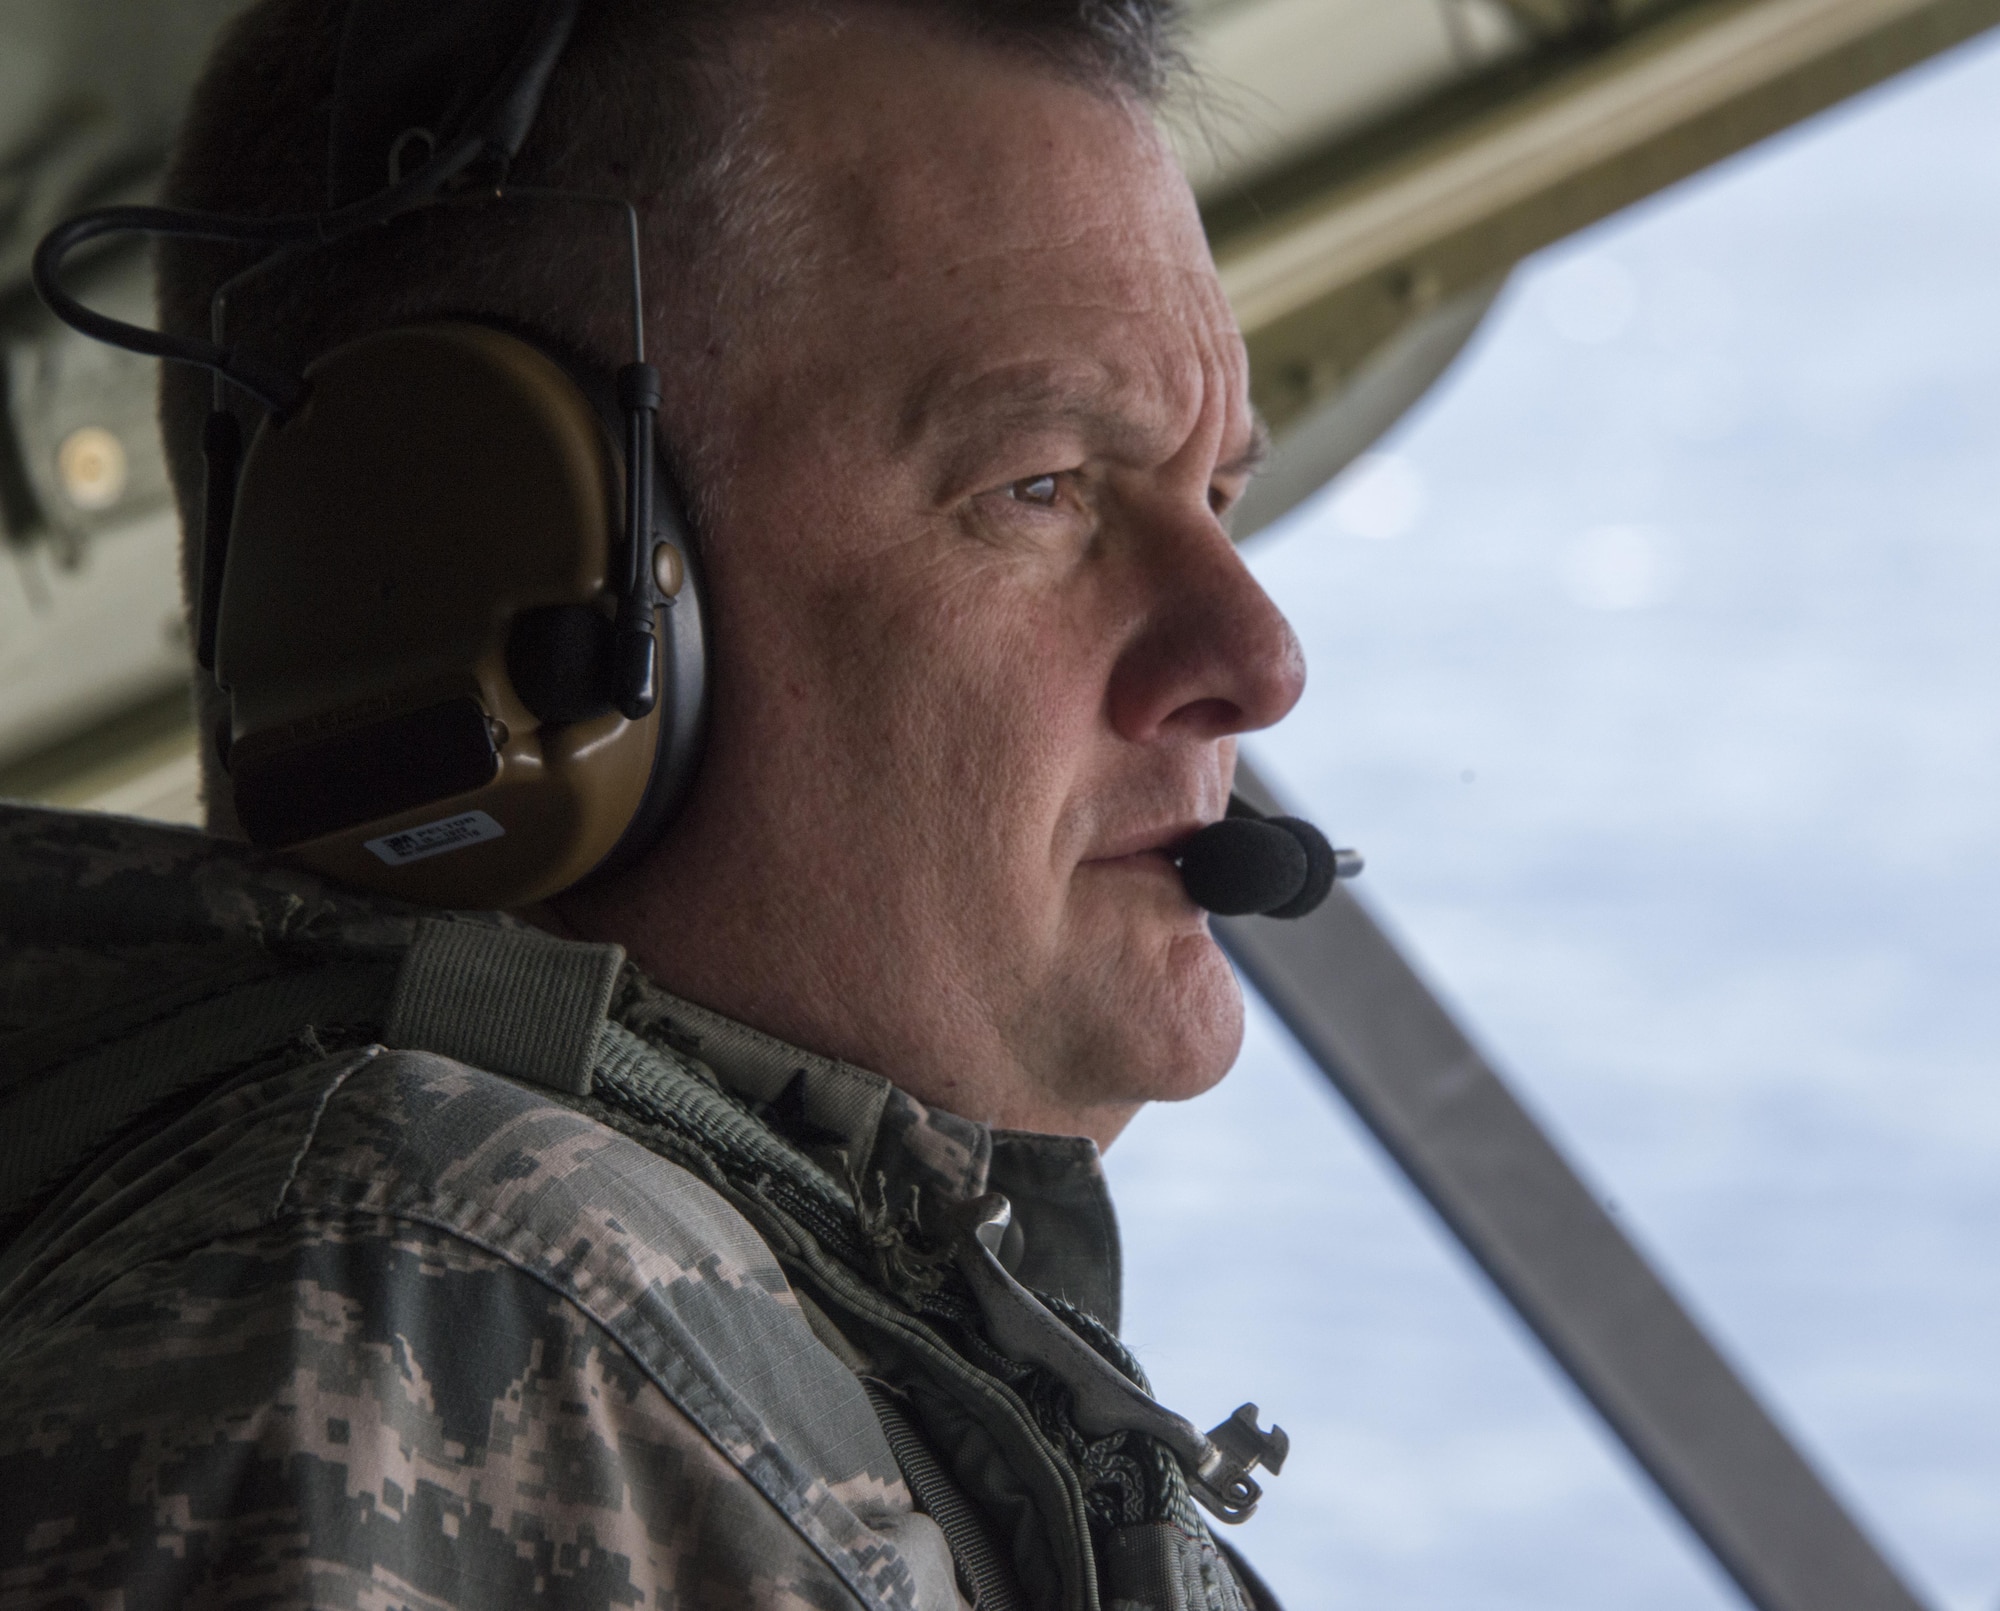 U.S. Air Force Lt. Gen. Brad Webb, commander of Air Force Special Operations Command, looks out the back of an MC-130J Commando II during an island tour of Okinawa, Japan, Nov. 7, 2016. Webb flew on the MC-130J as a part of his visit to the 353rd Special Operations Group. (U.S. Air Force photo by Capt. Jessica Tait)